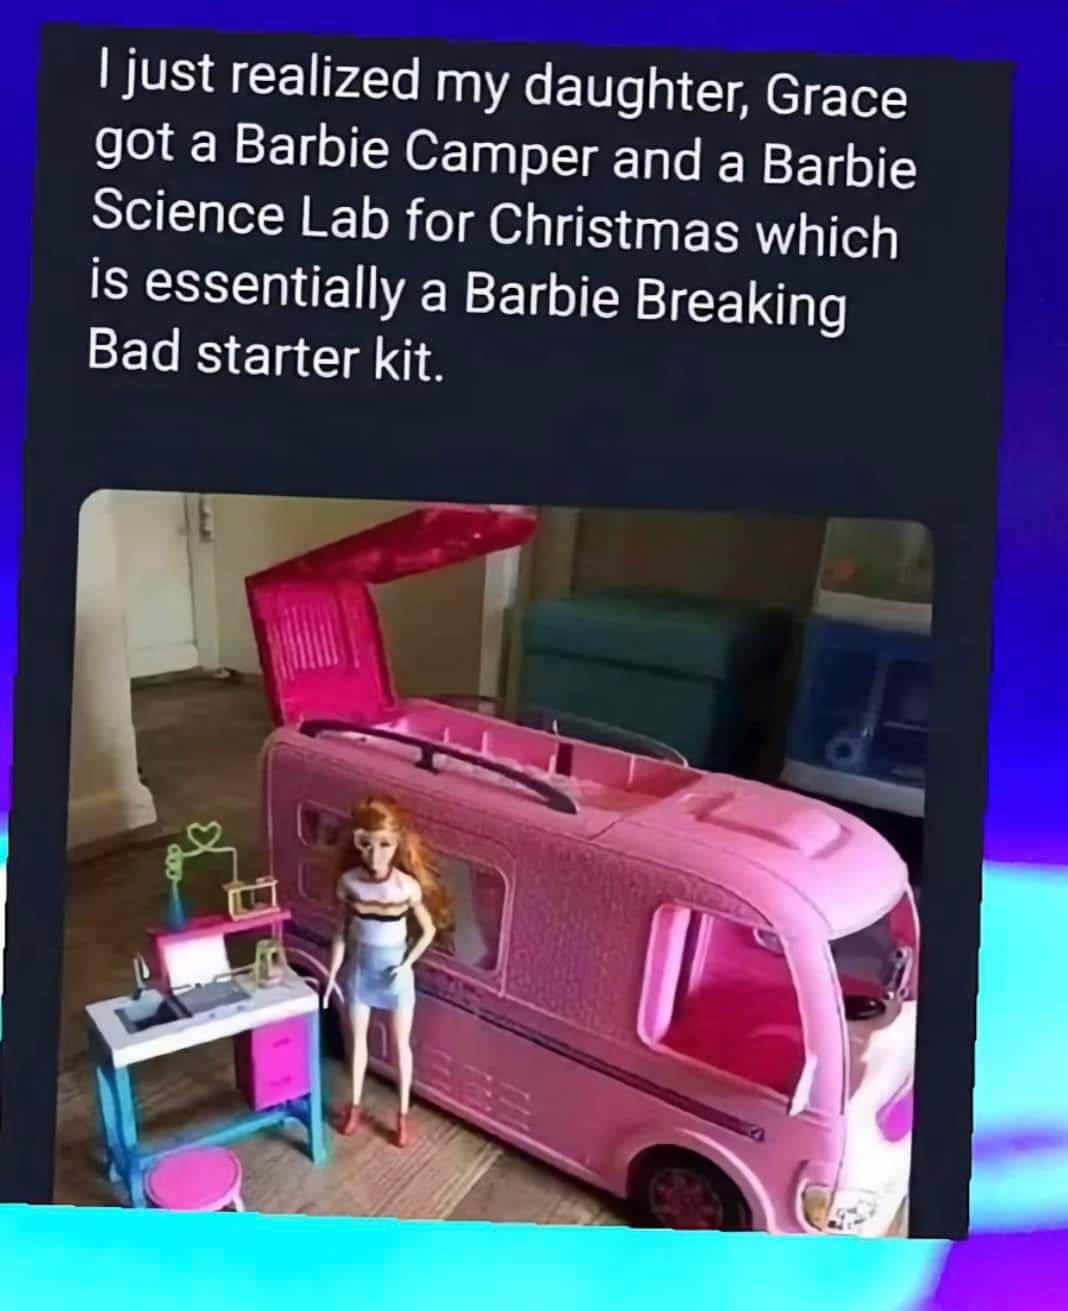 Barbie and Her Tools for Crime